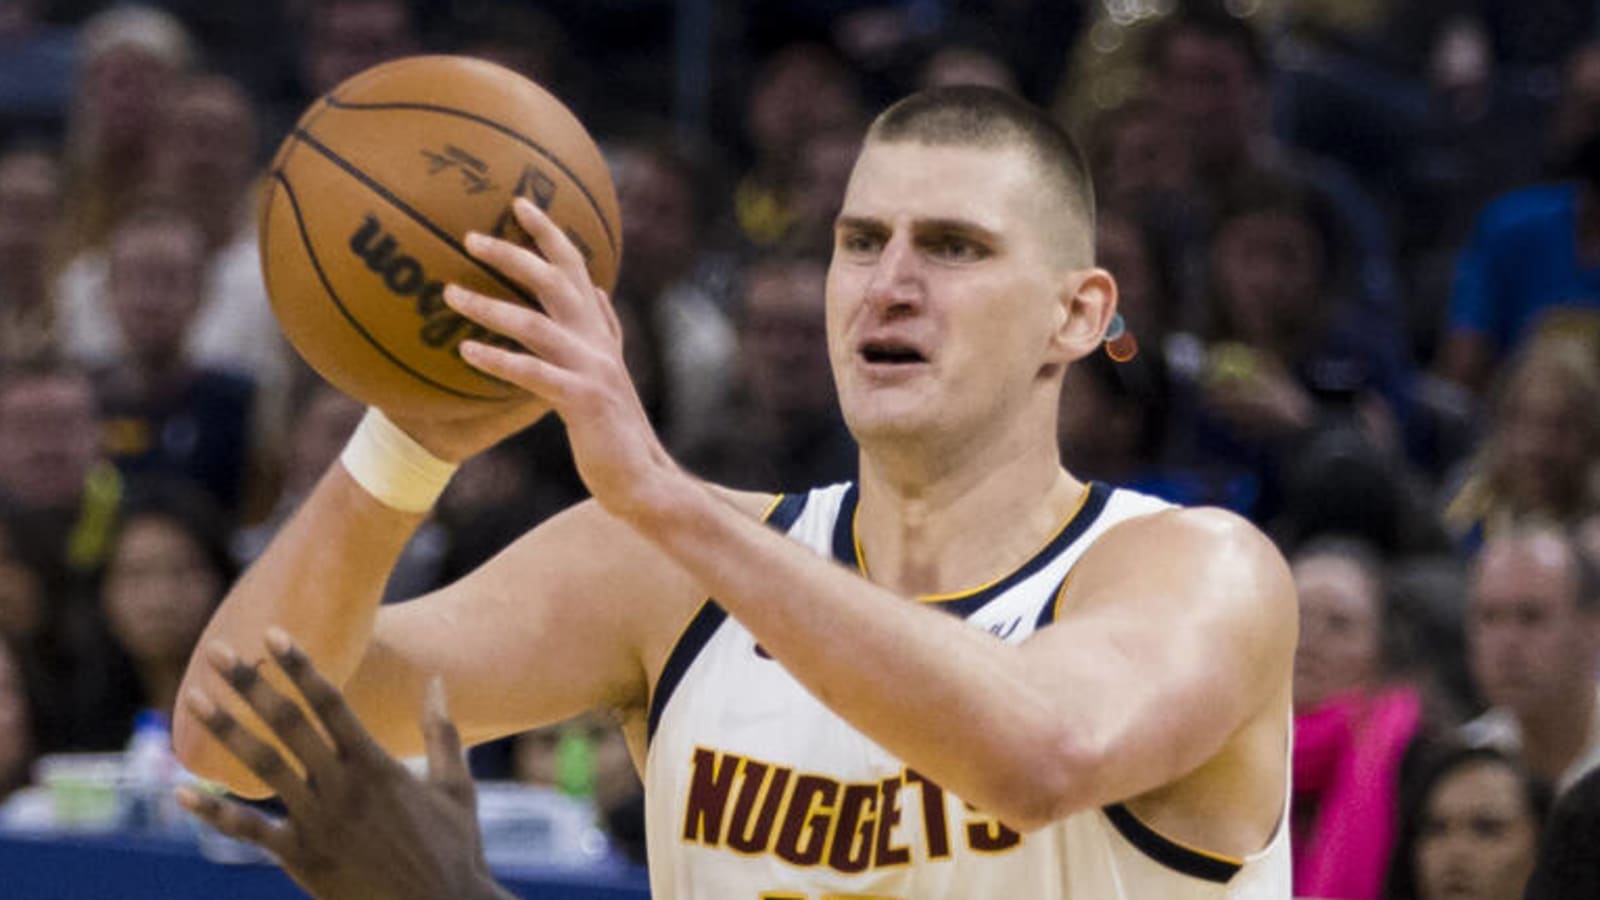 Jokic records 78th triple-double, tying Chamberlain for most by a center